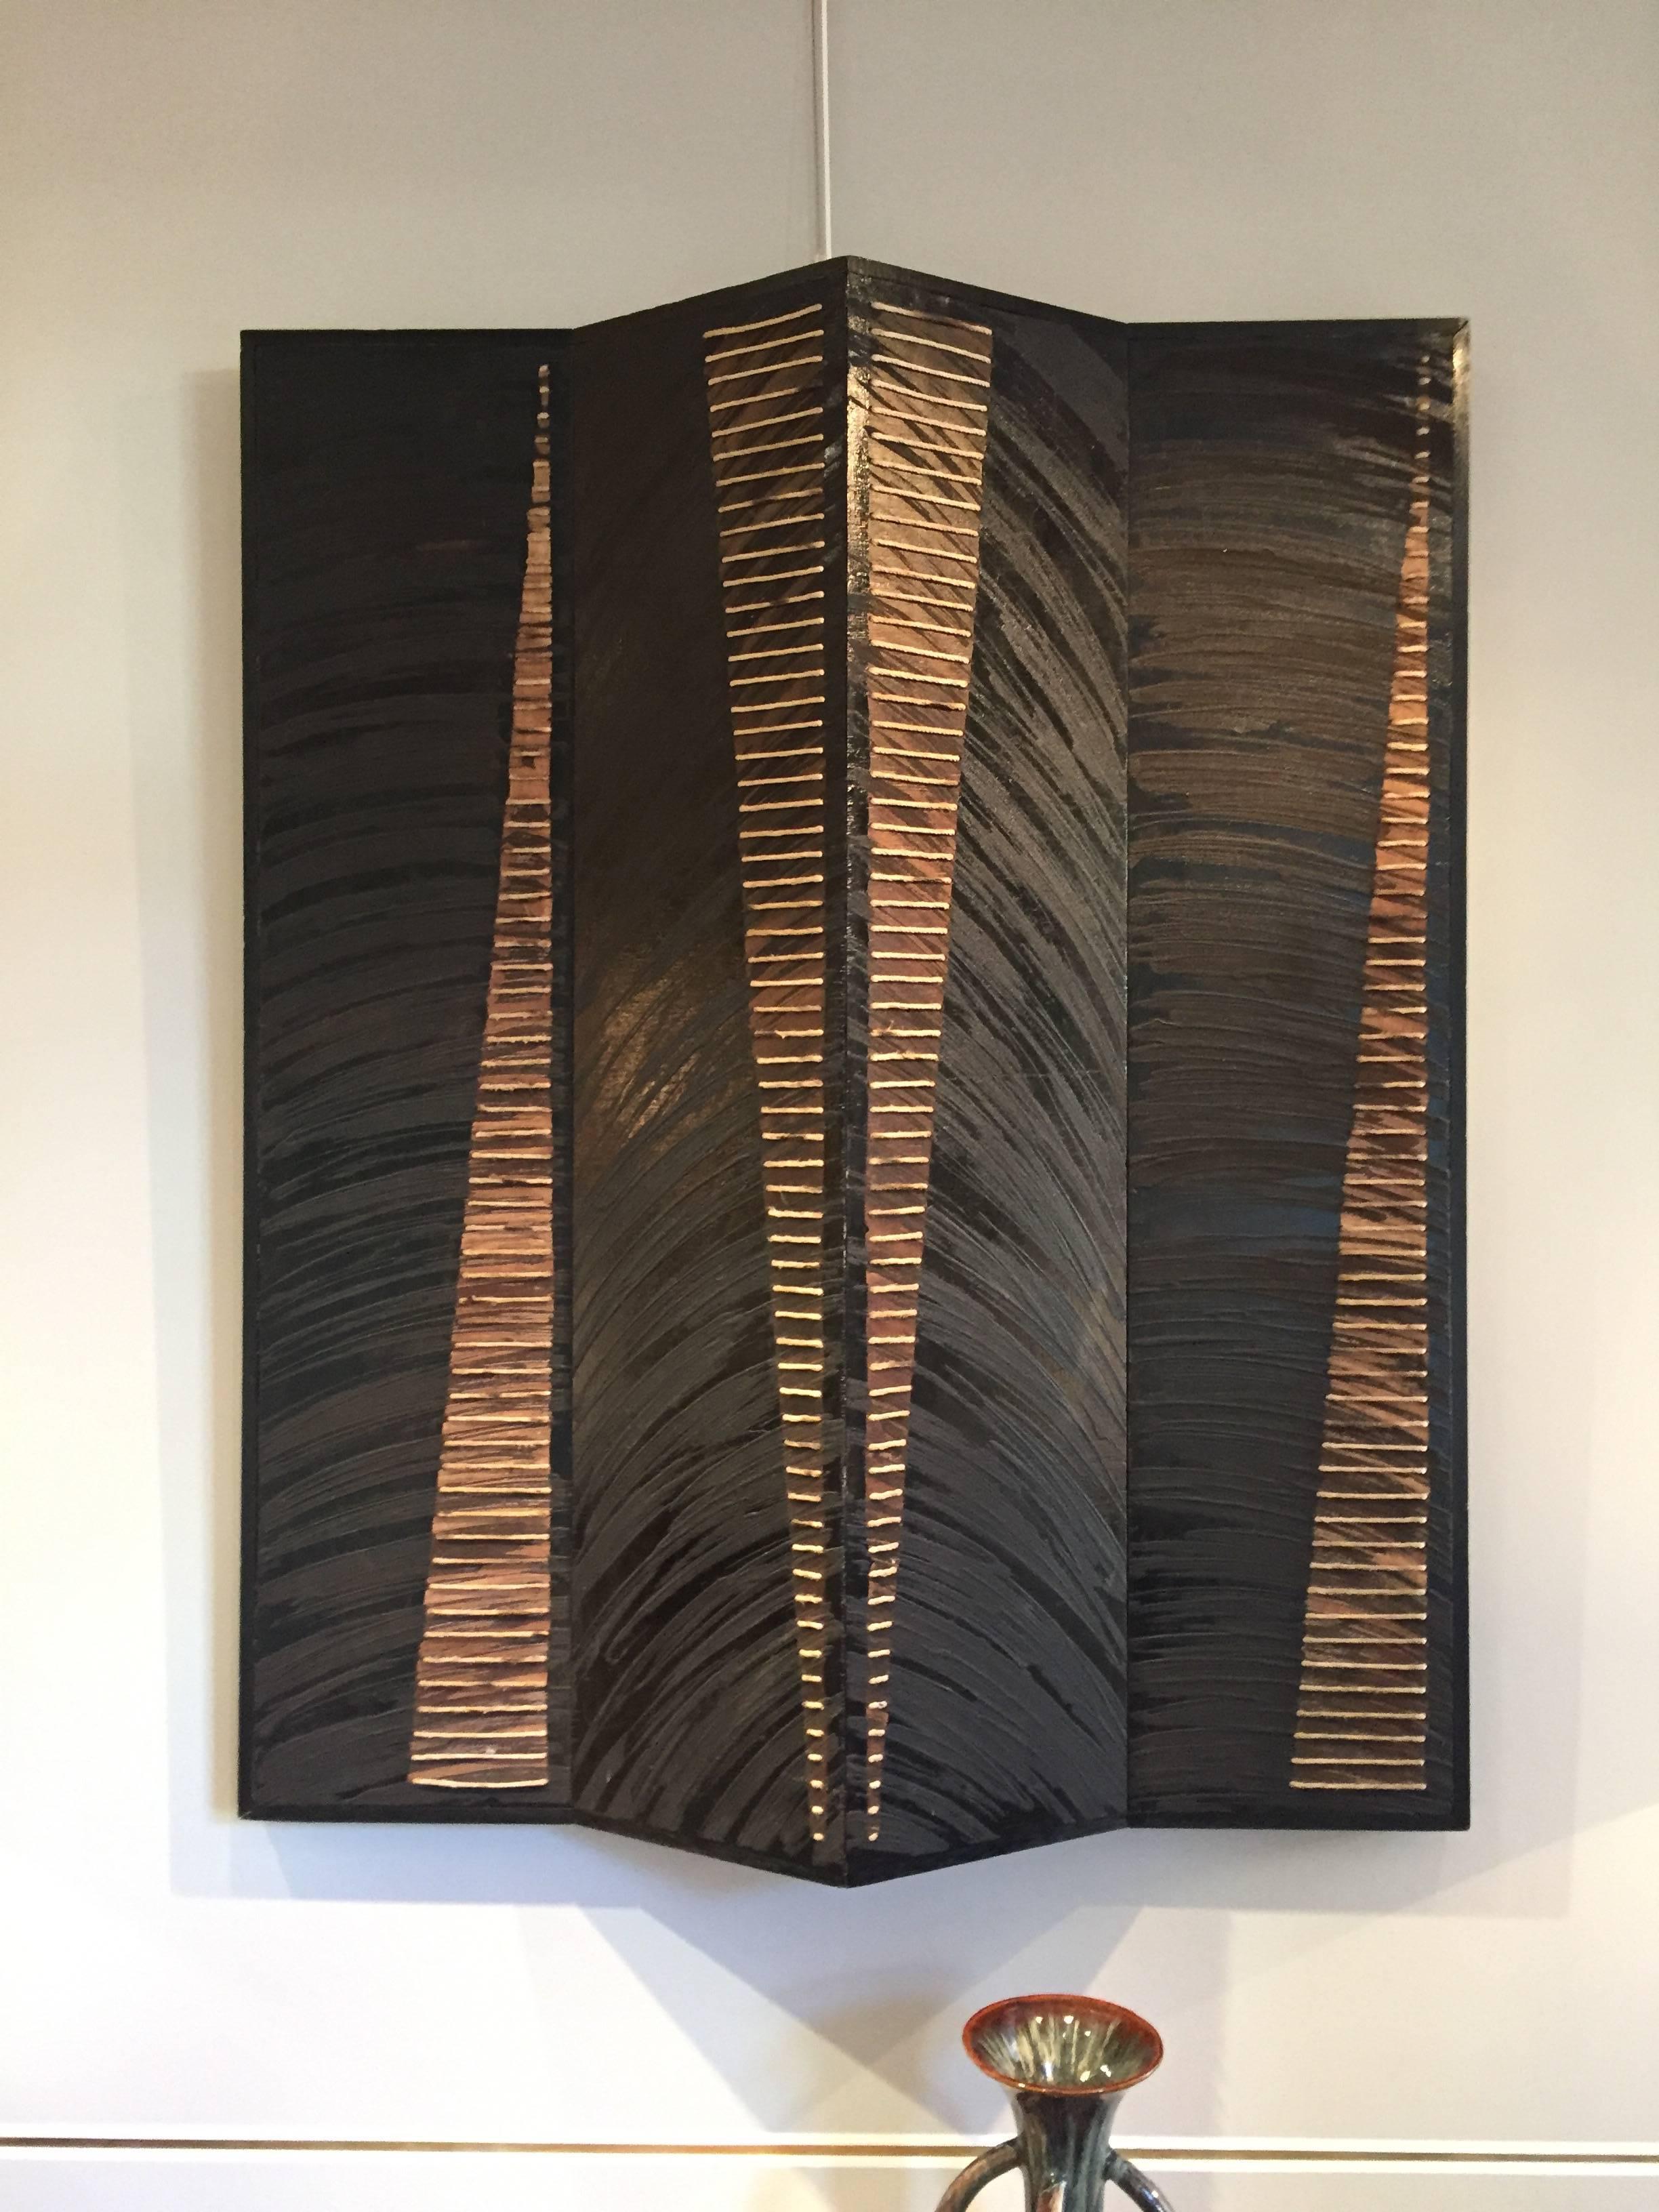 An imposing and unique mixed media wall-mounted sculpture or picture.
Wood, paint, wax, acid patination, cord. Pierre Soulage inspired.
Continental, circa 1970.
Measures: 125 cm high by 103 cm wide.